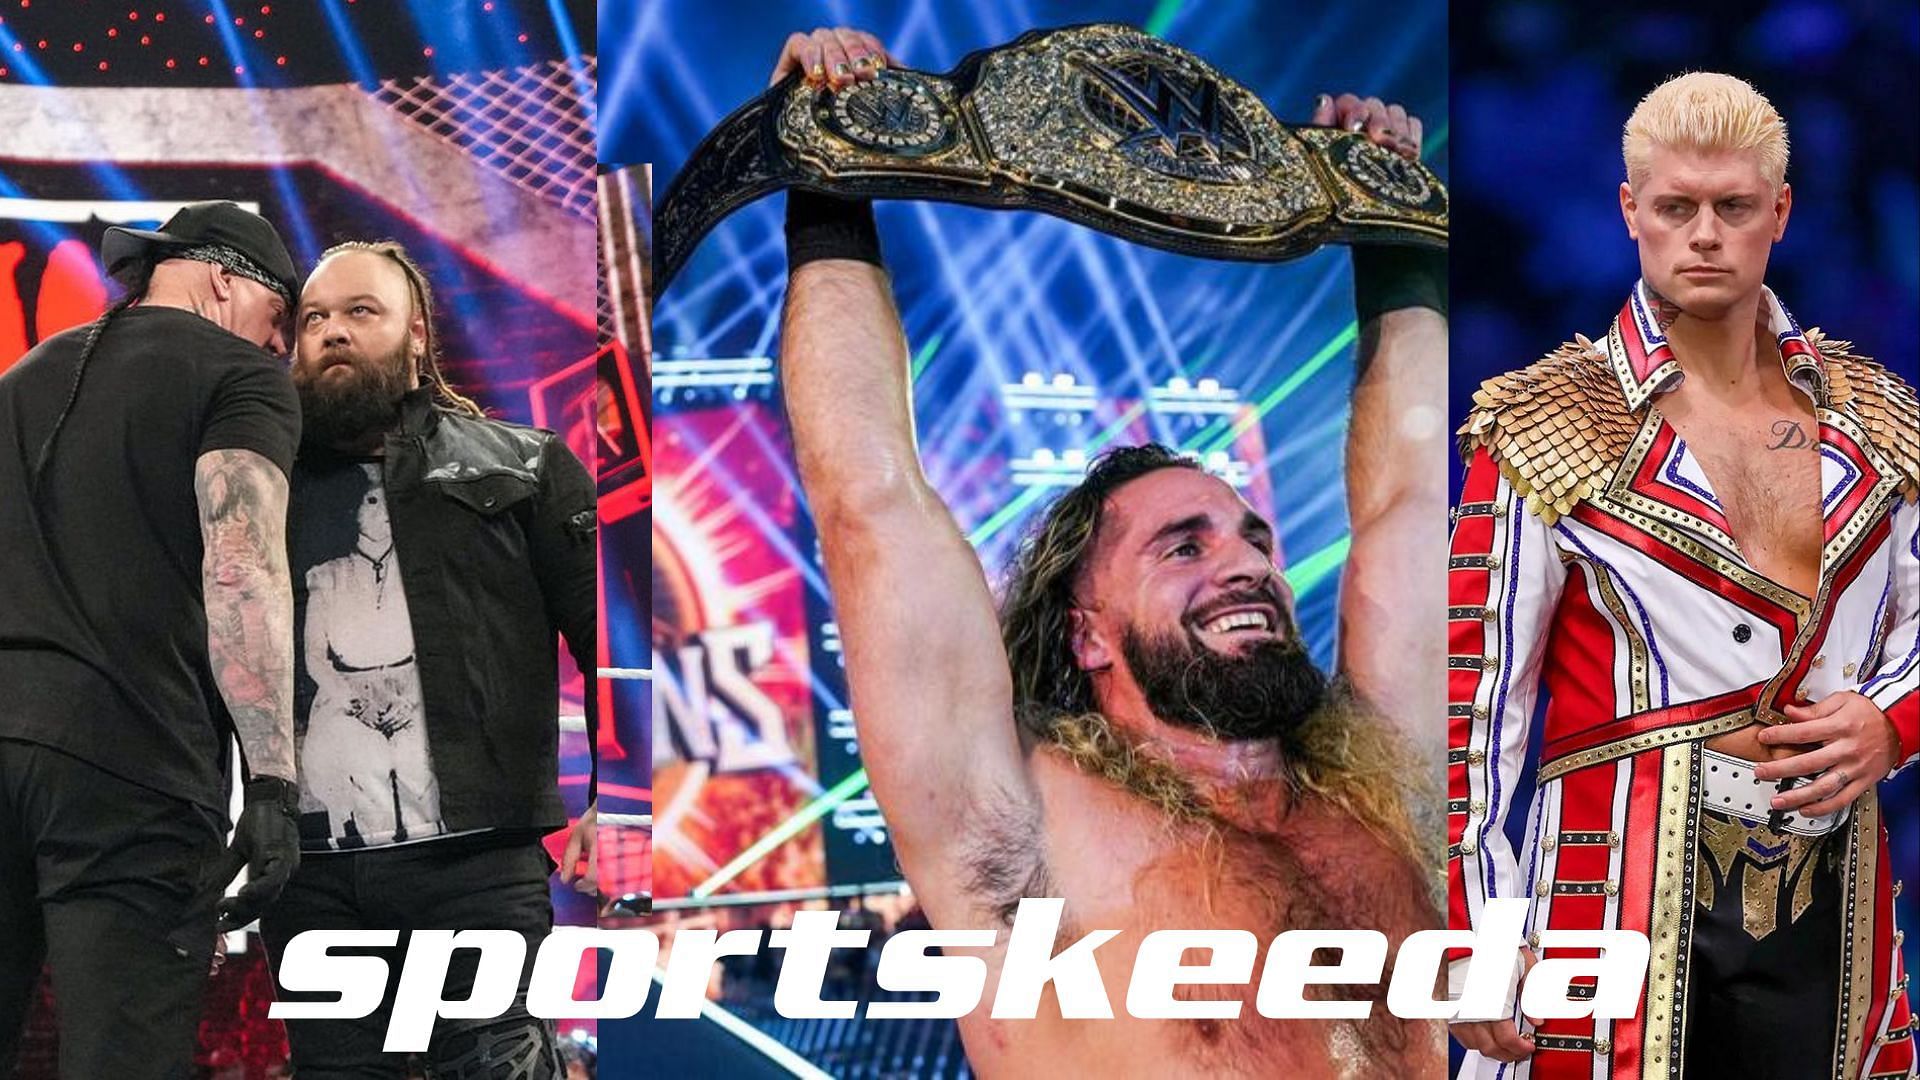 Seth Rollins captured the new World Heavyweight Championship at Night of Champions.